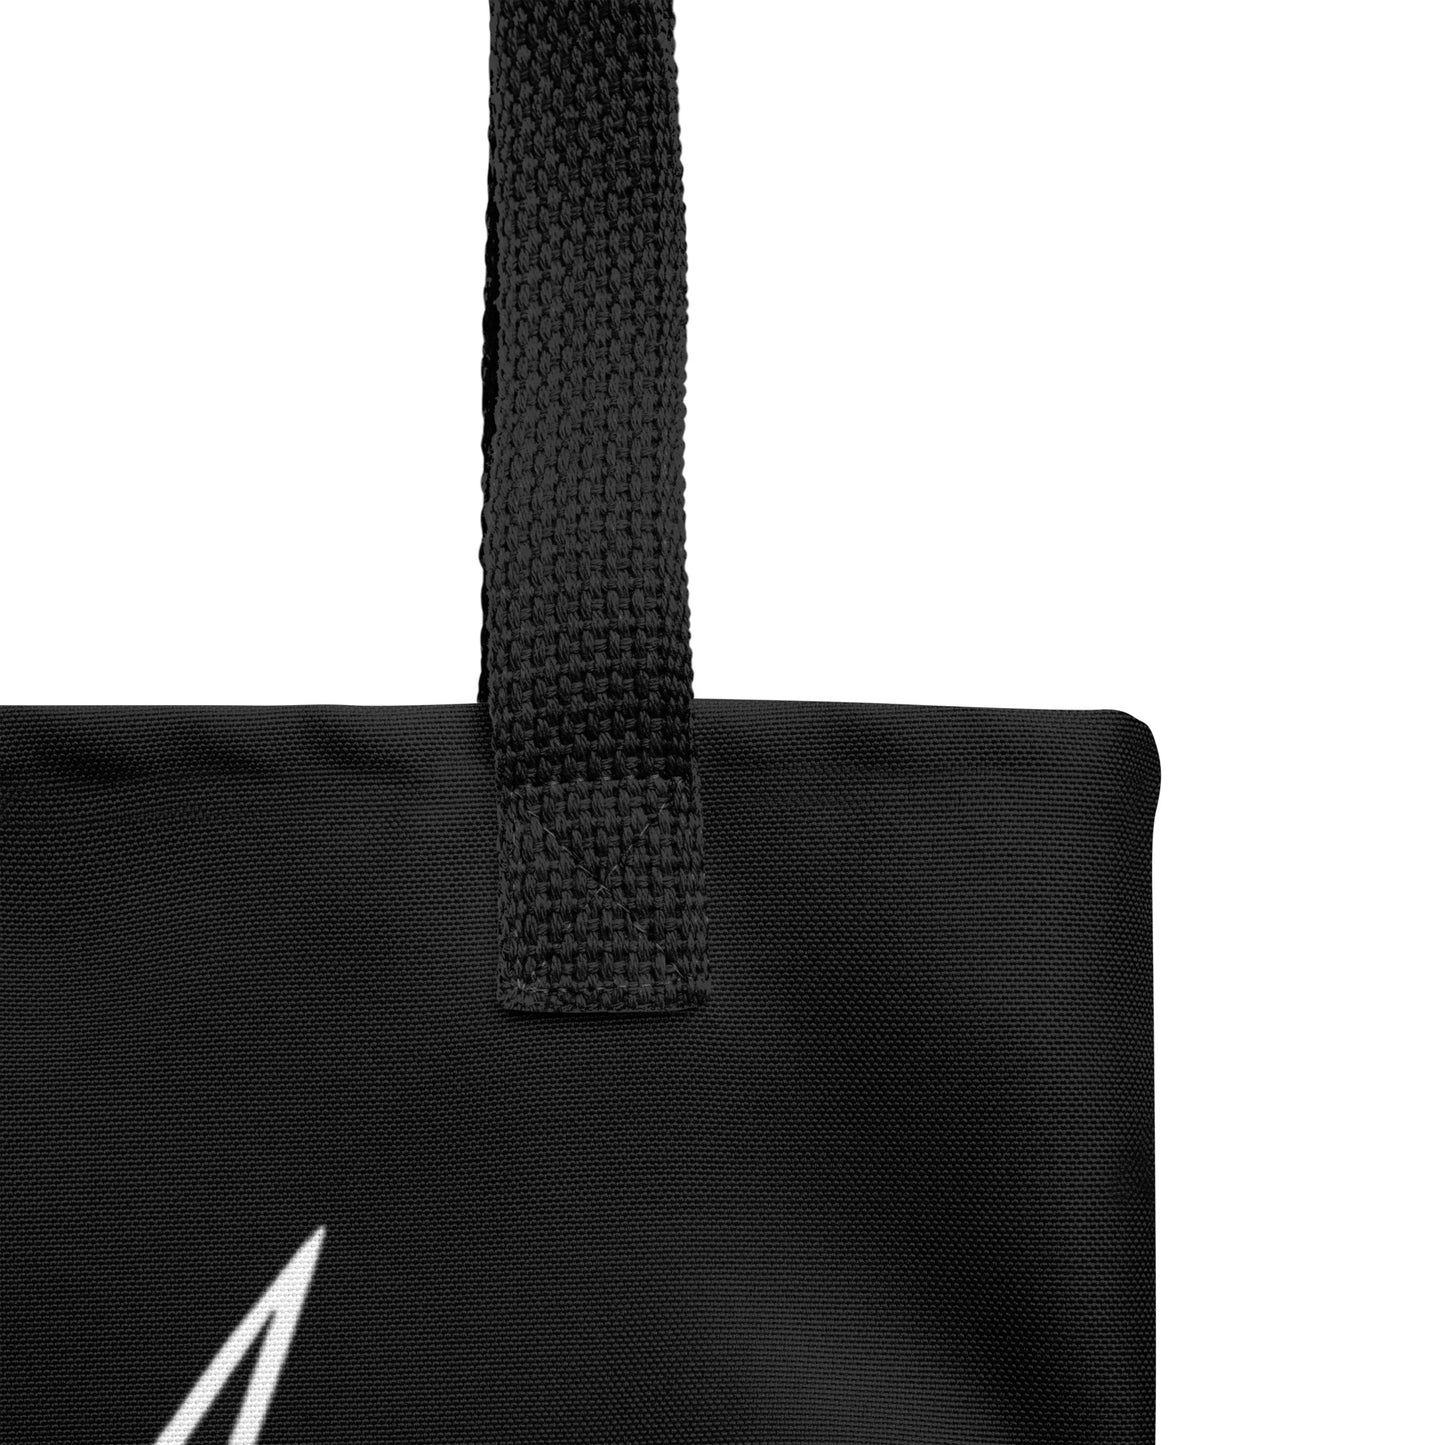 Thunder and Lightning Tote